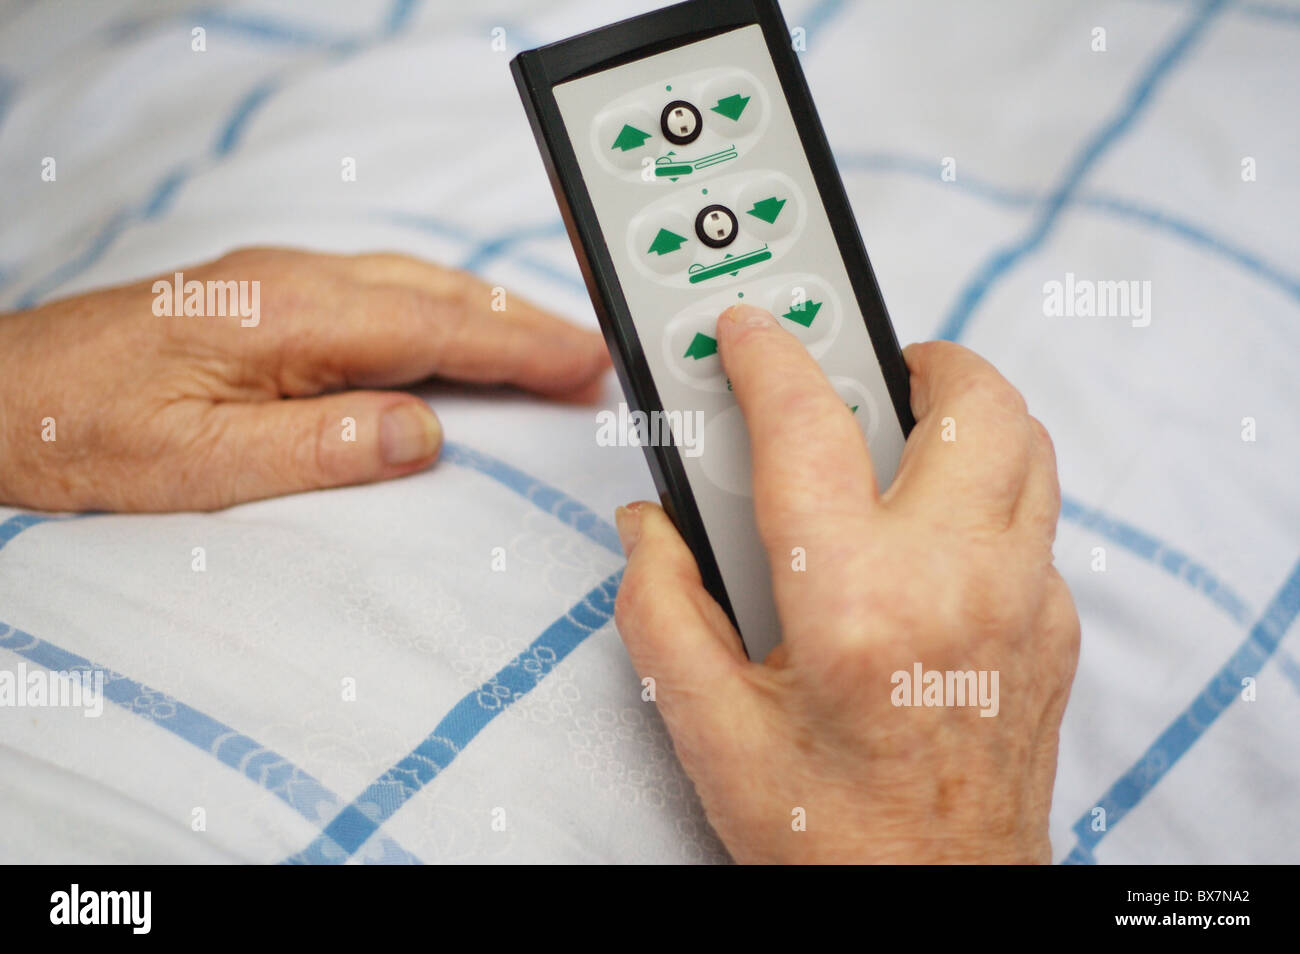 Hands of a care-dependent person holding remote control of an adjustable bed Stock Photo